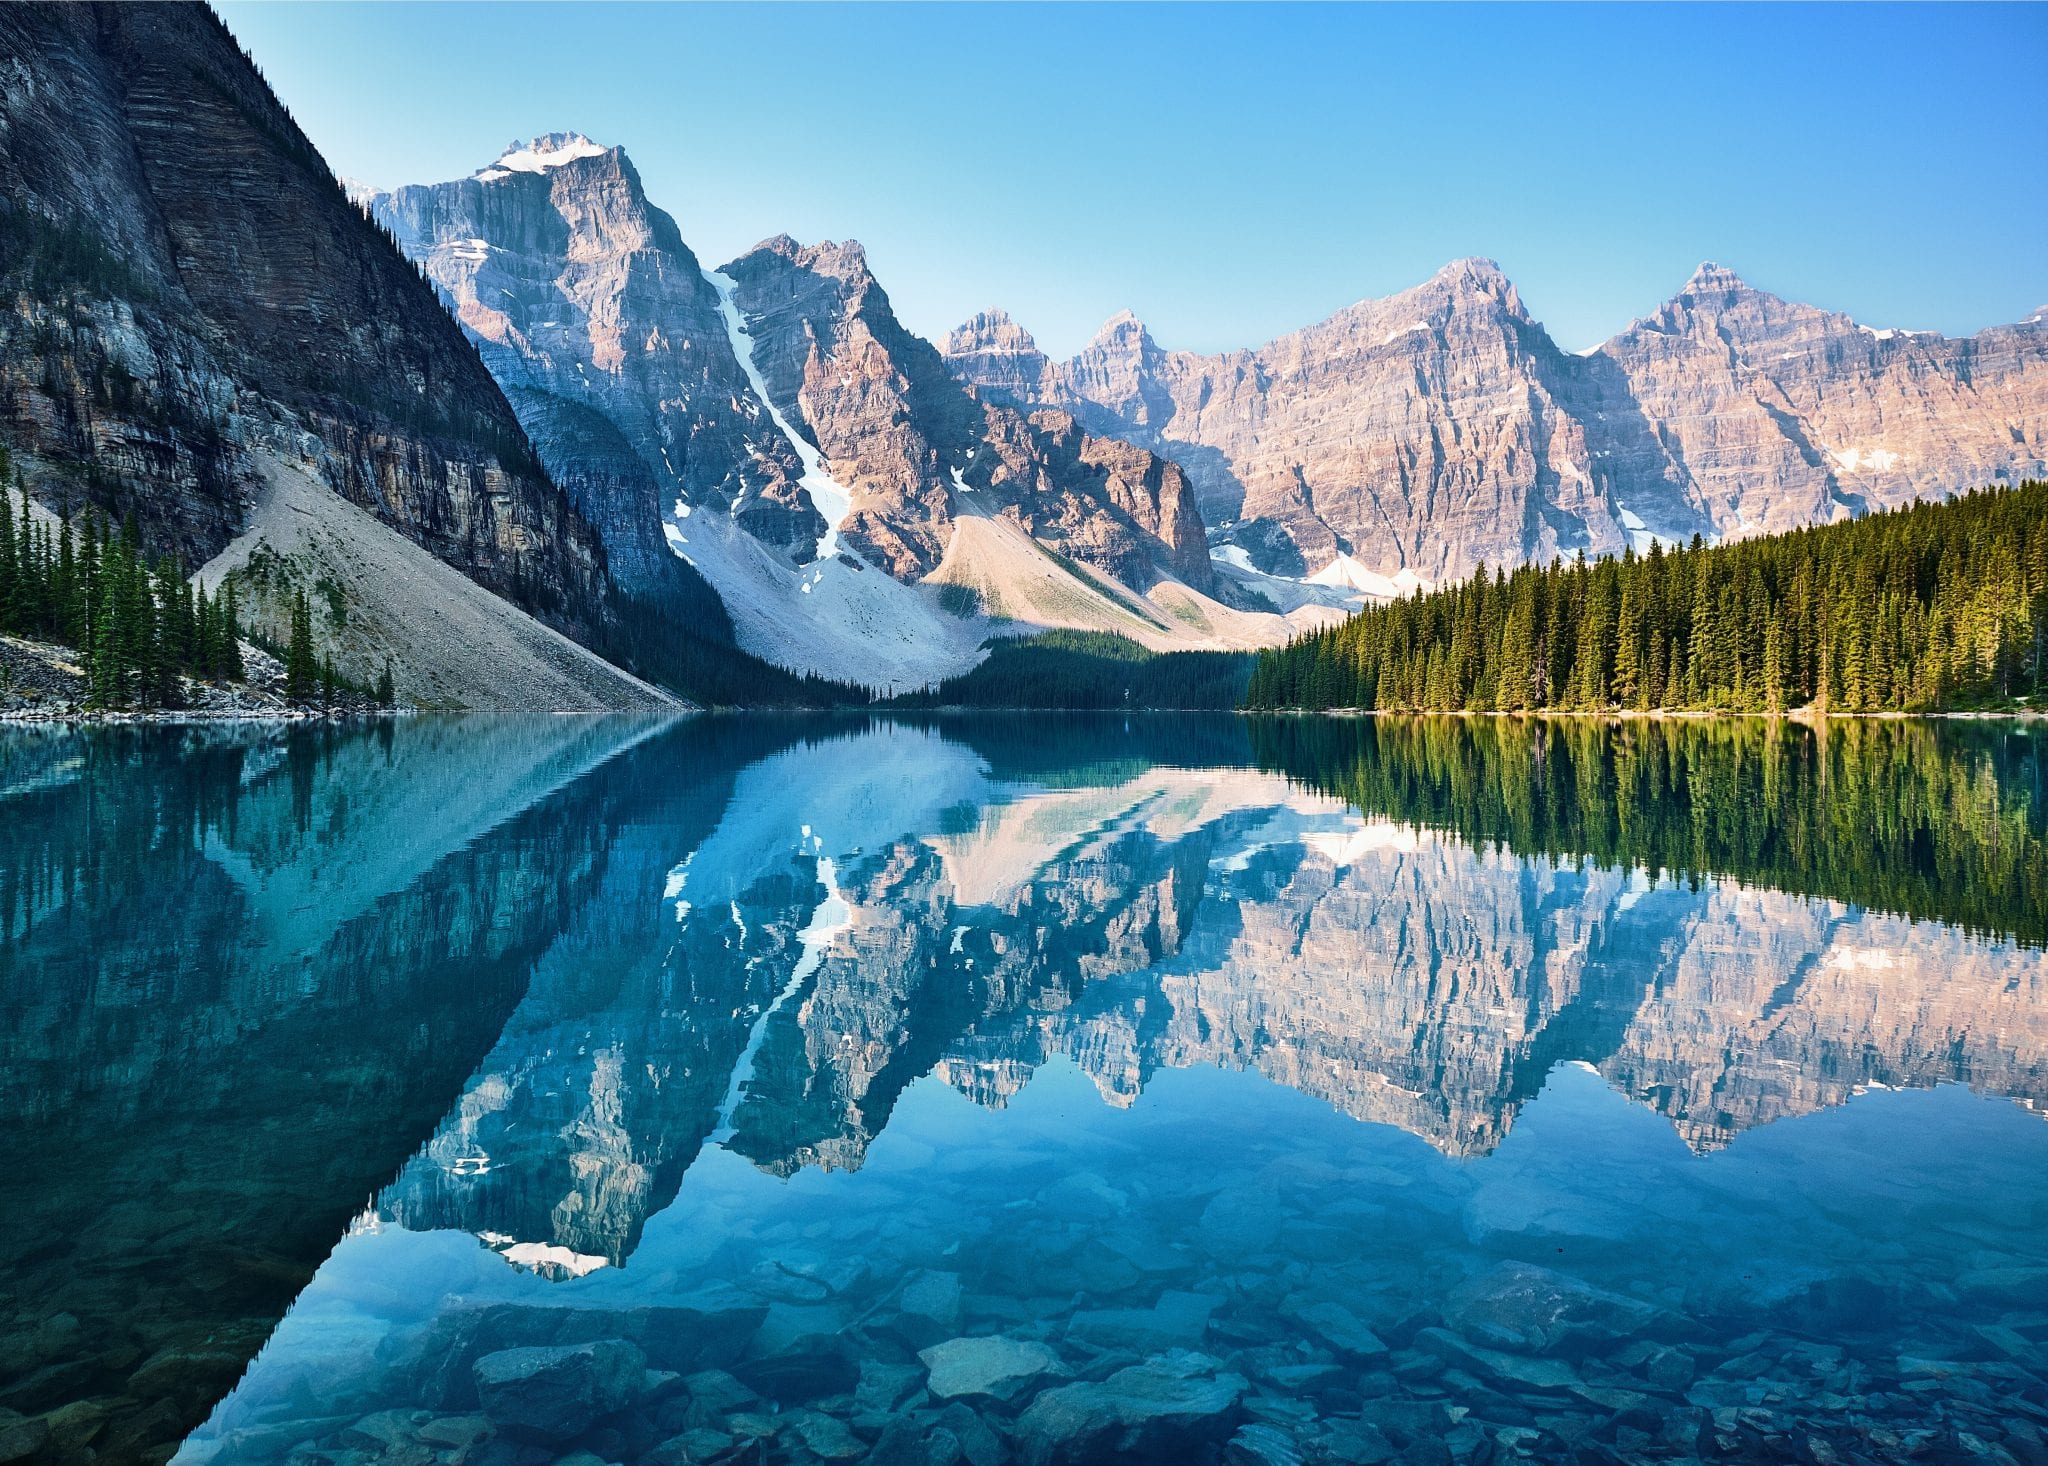 Things to do in Banff National Park